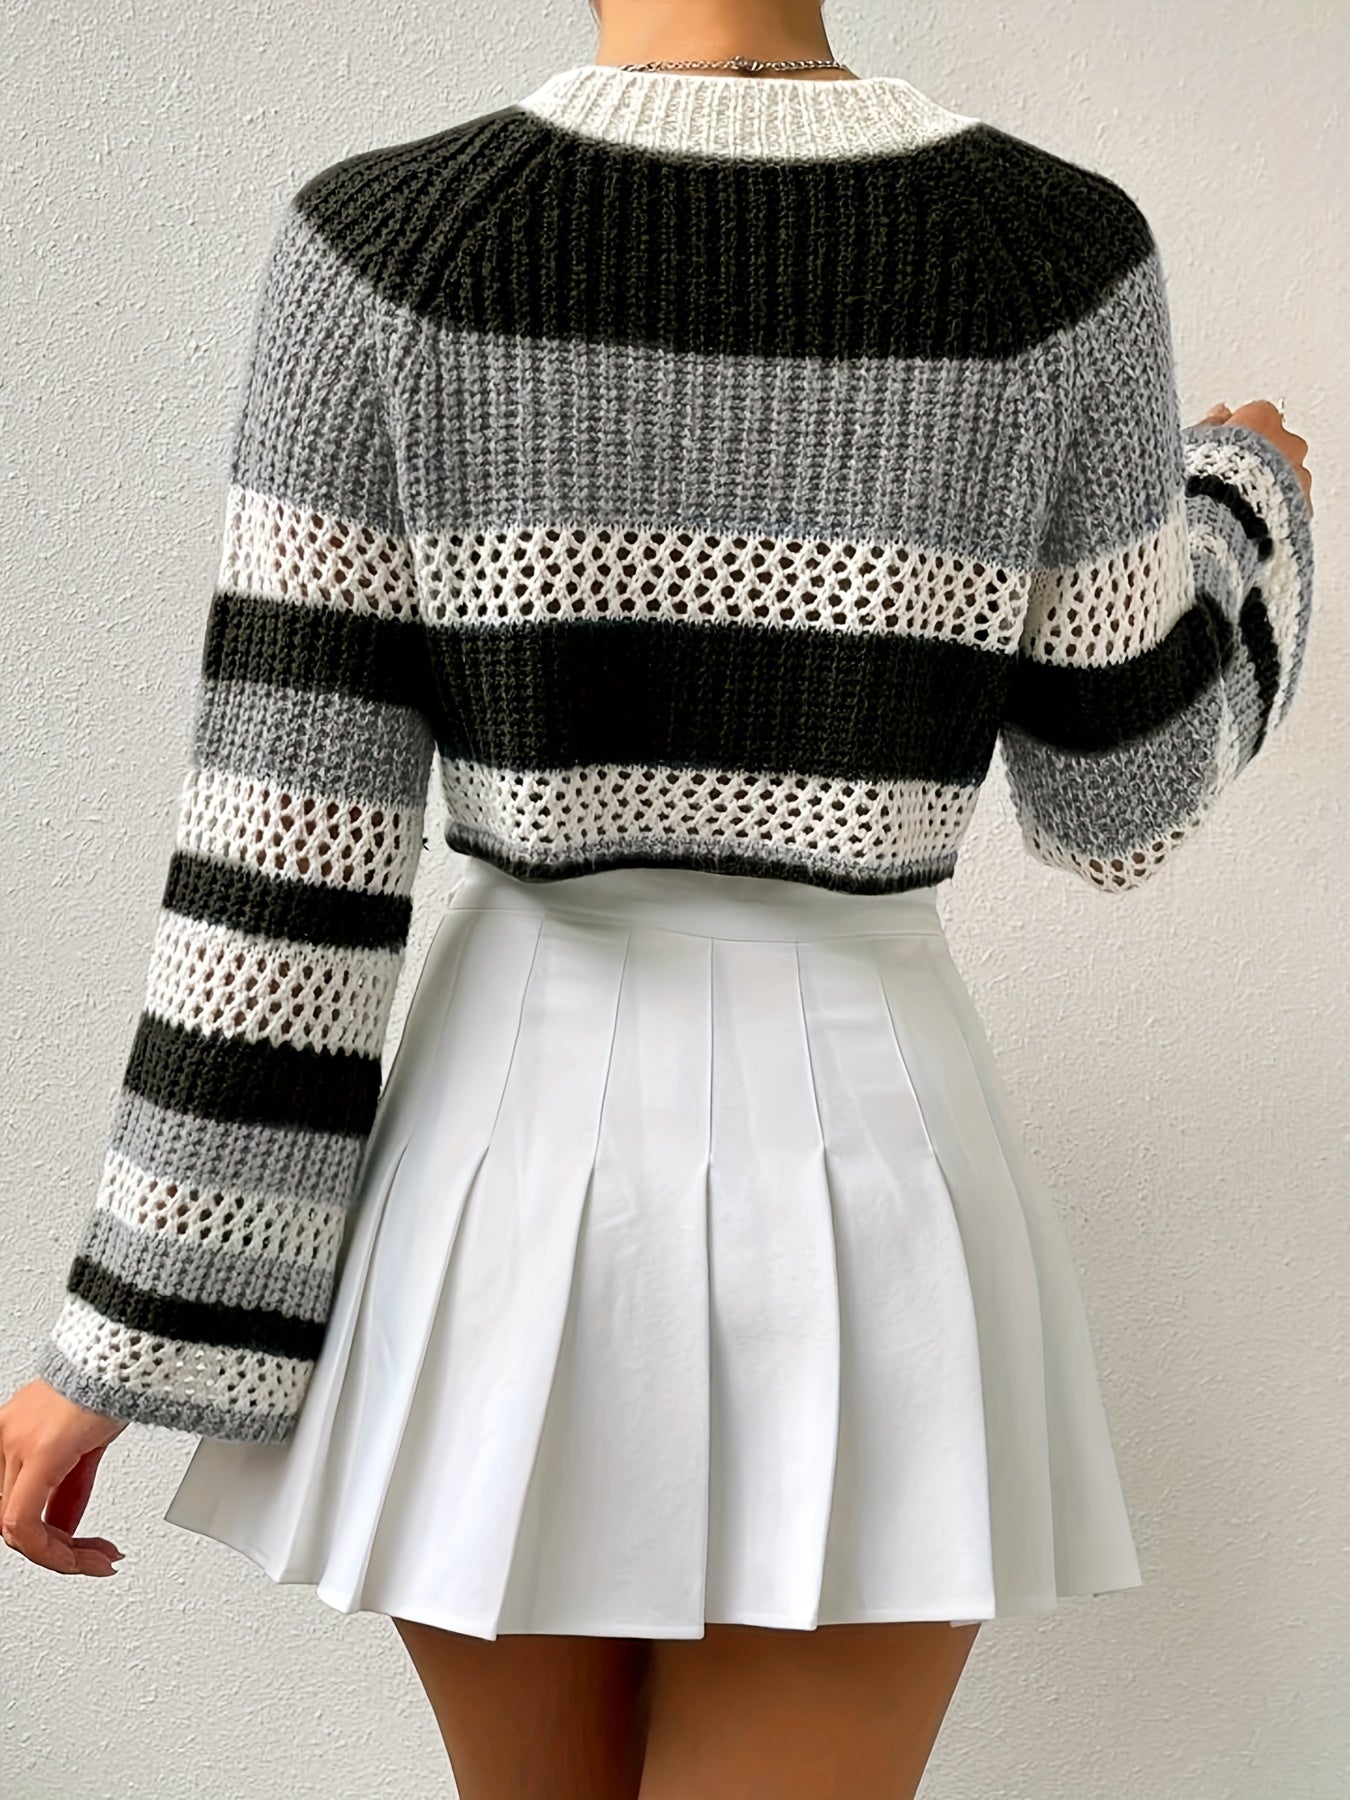 vlovelaw  Hollow Outer Striped Knit Sweater, Casual Crew Neck Long Sleeve Sweater, Women's Clothing